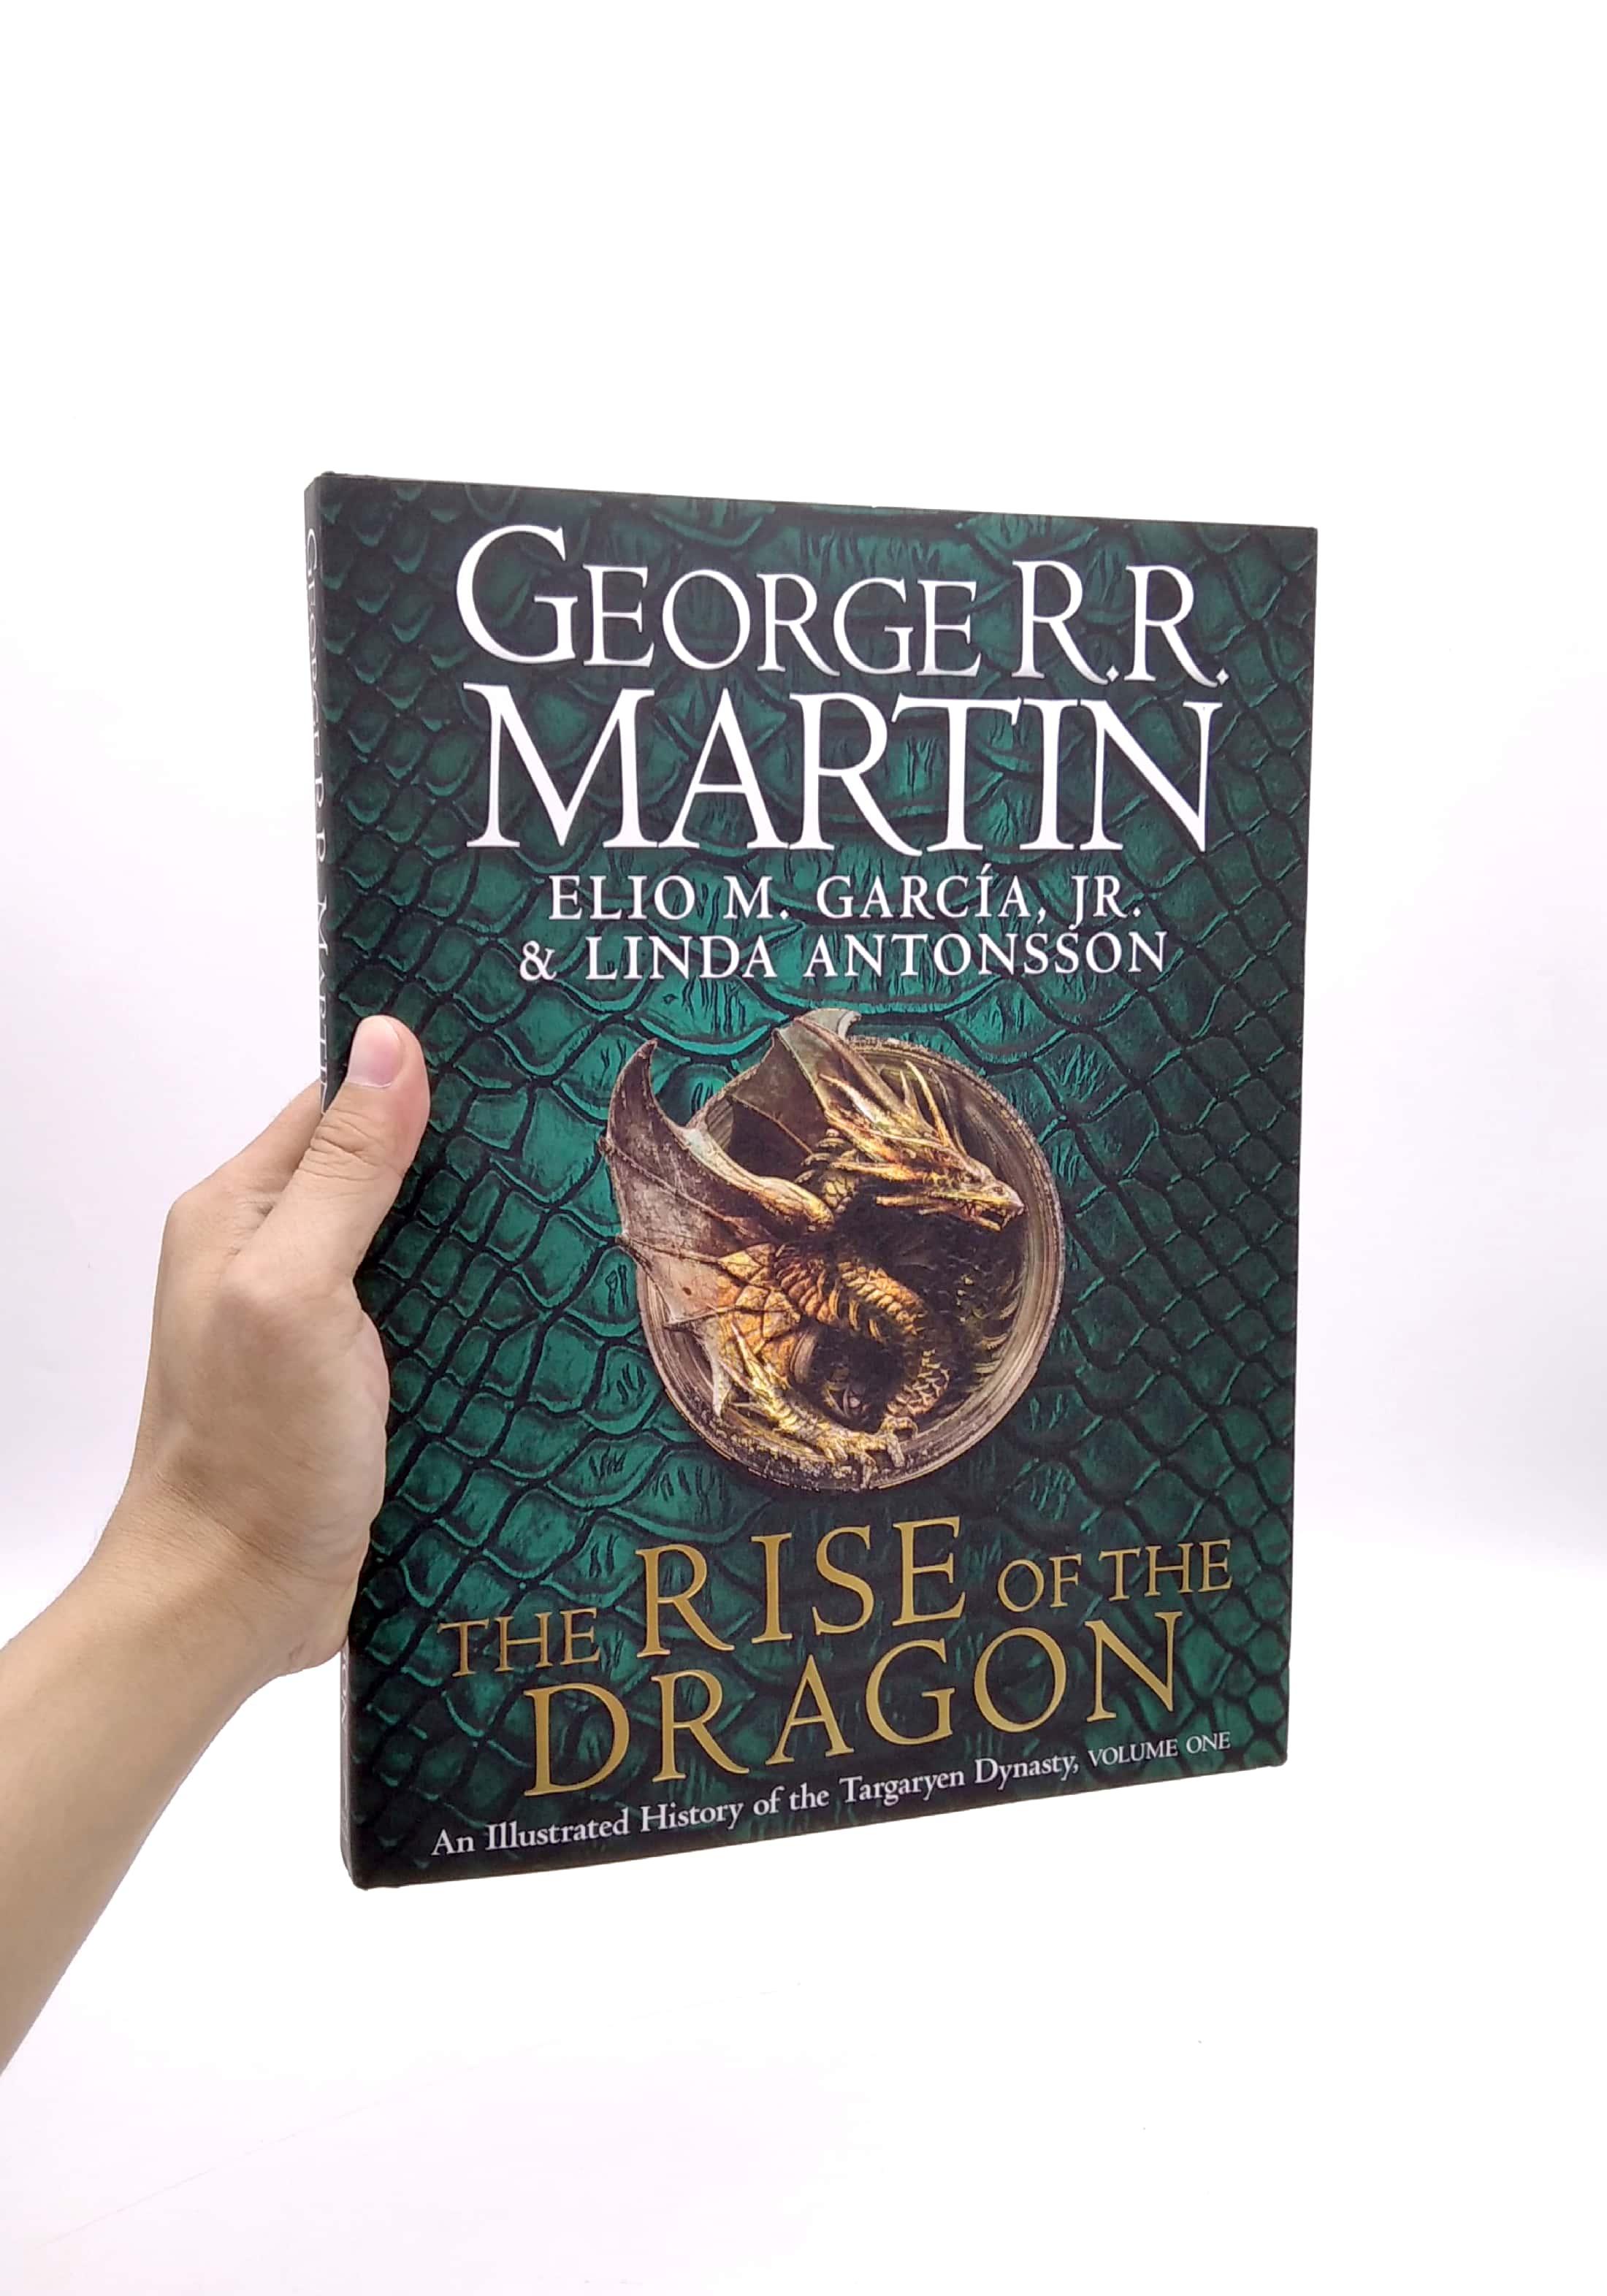 The Rise Of The Dragon : An Illustrated History Of The Targaryen Dynasty